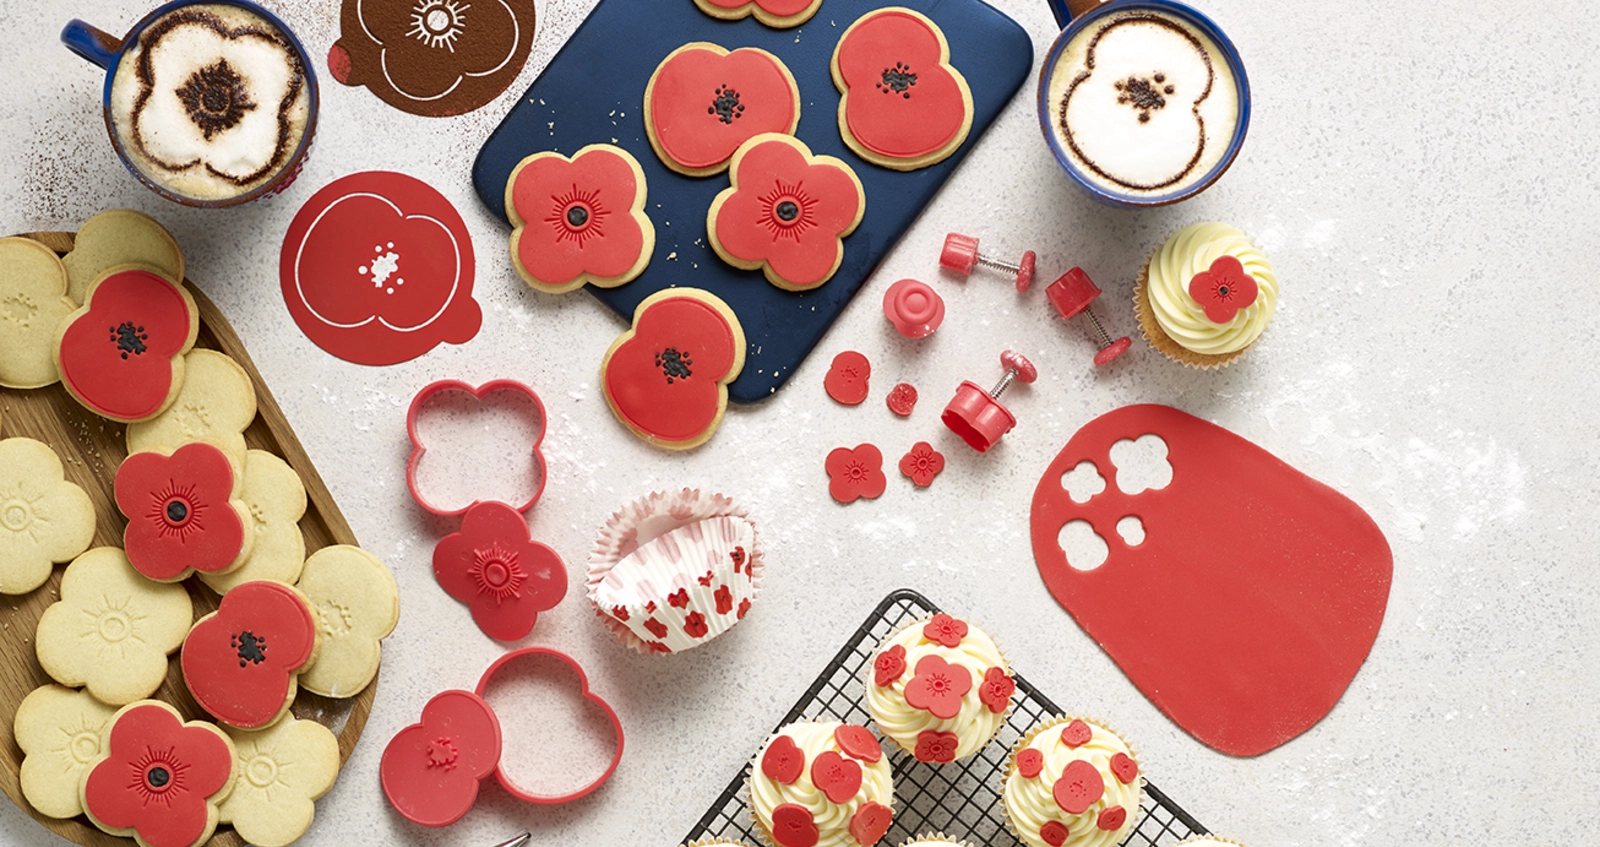 Poppy cookie cutters and muffins from Lakeland